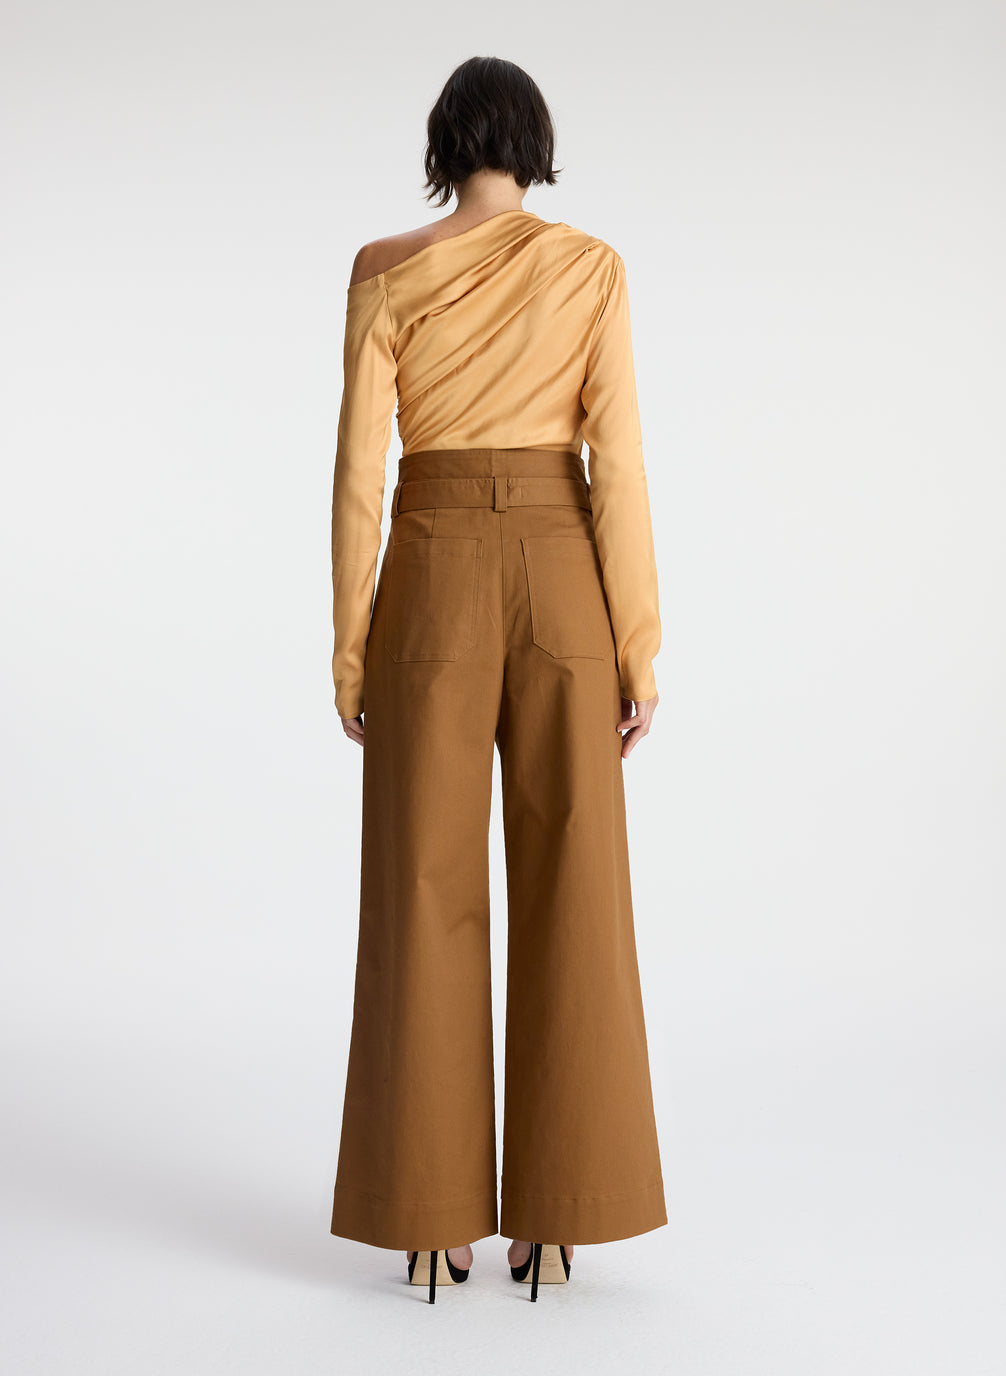 back view view of woman wearing tan one shoulder long sleeve top and brown wide leg pants